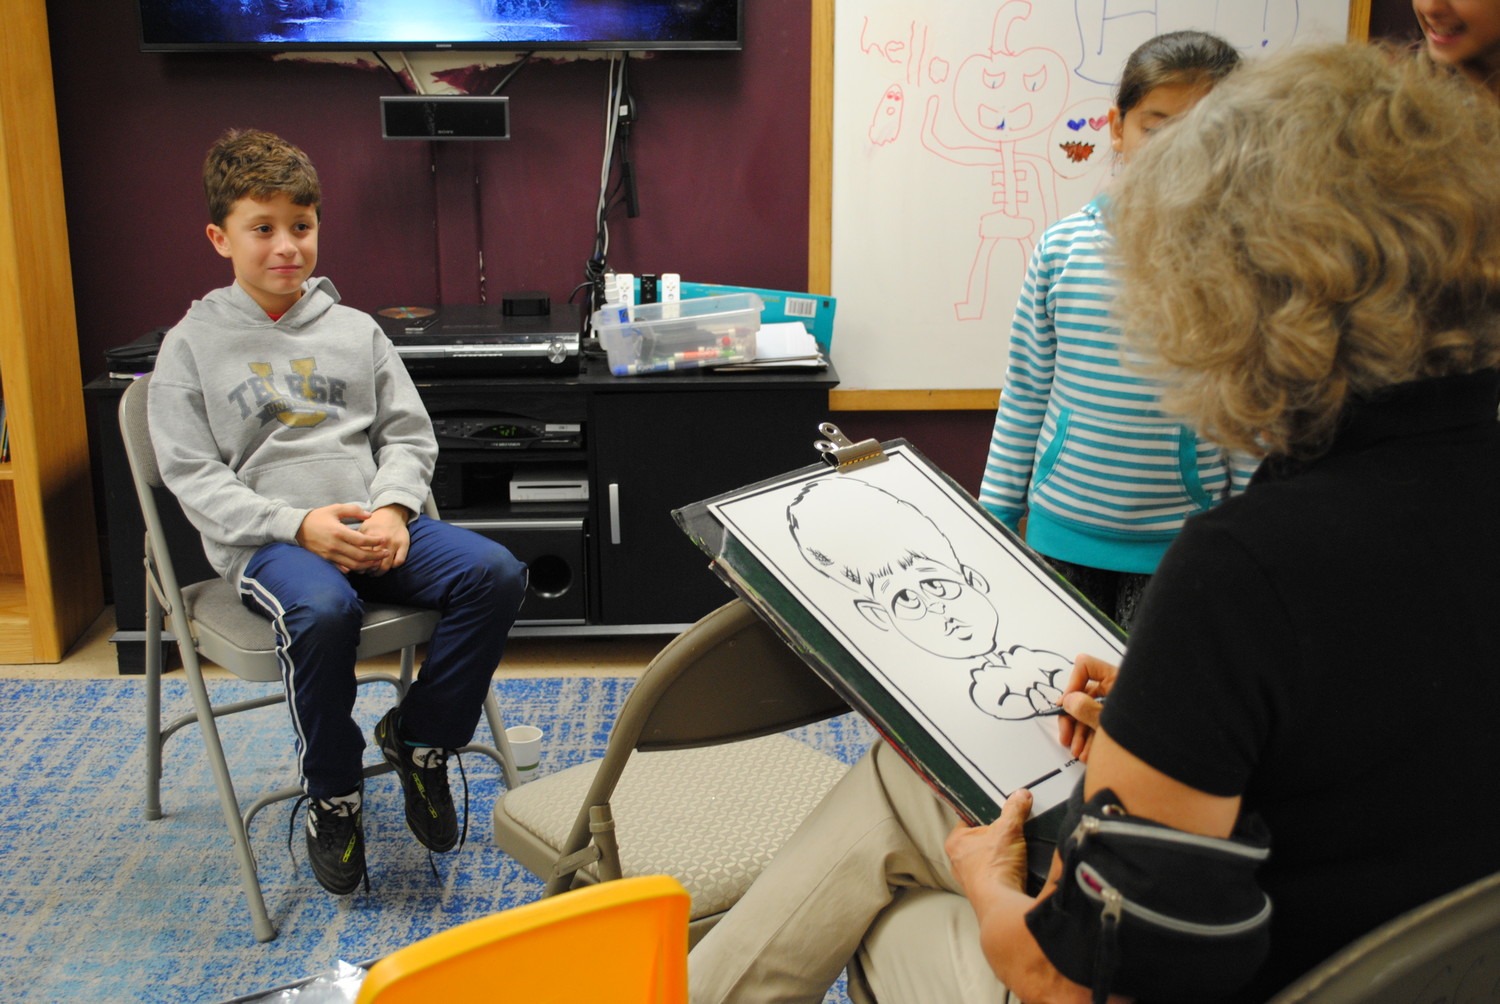 Michael Telese, 8, had his cartoon drawn by Alison of Alison G’s Fine Artwork at the Youth Bureau.